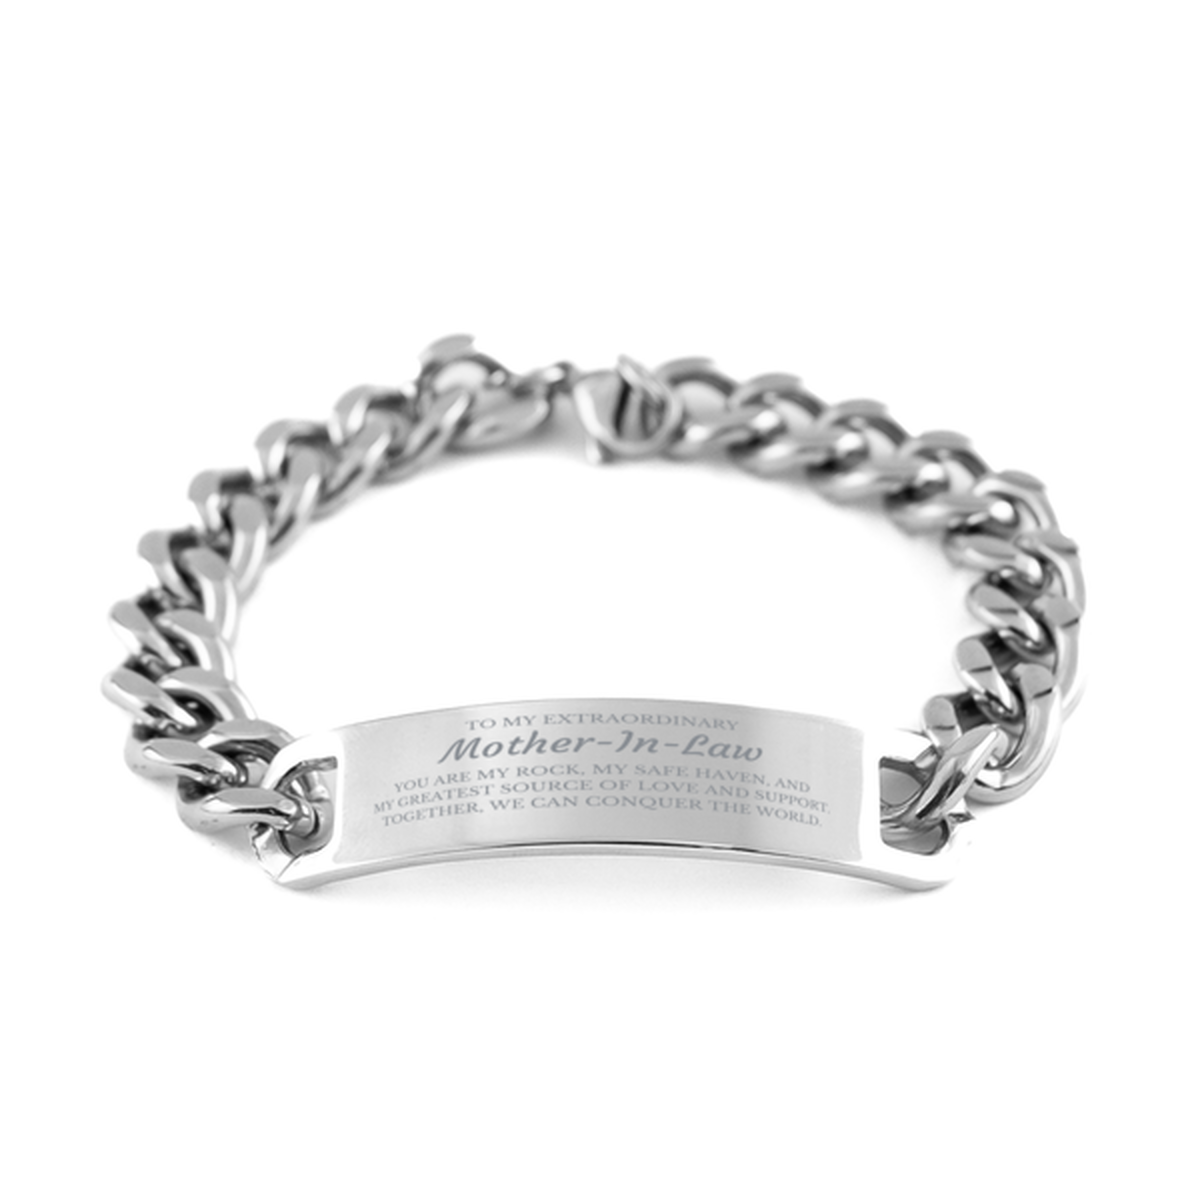 To My Extraordinary Mother-In-Law Gifts, Together, we can conquer the world, Birthday Cuban Chain Stainless Steel Bracelet For Mother-In-Law, Christmas Gifts For Mother-In-Law